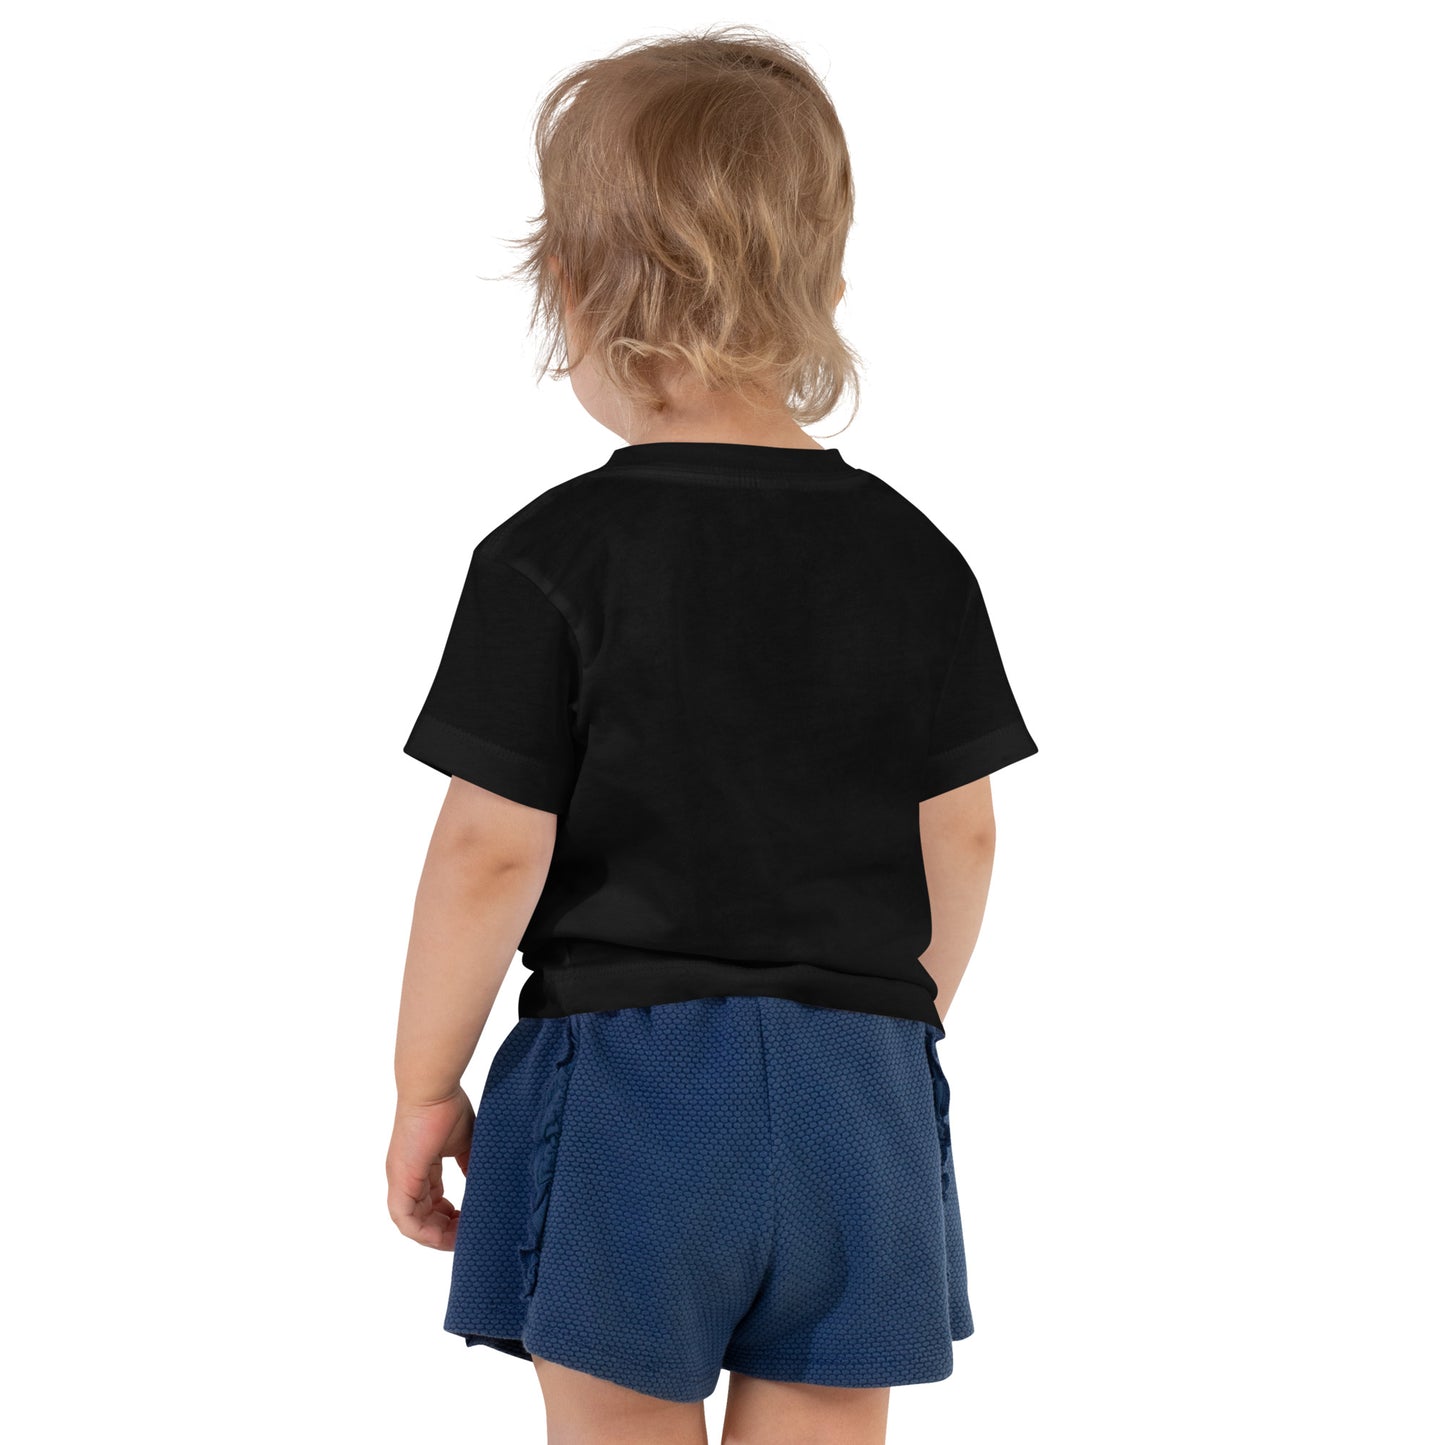 LOVES TO PLAY OUTSIDE toddler s/s tee